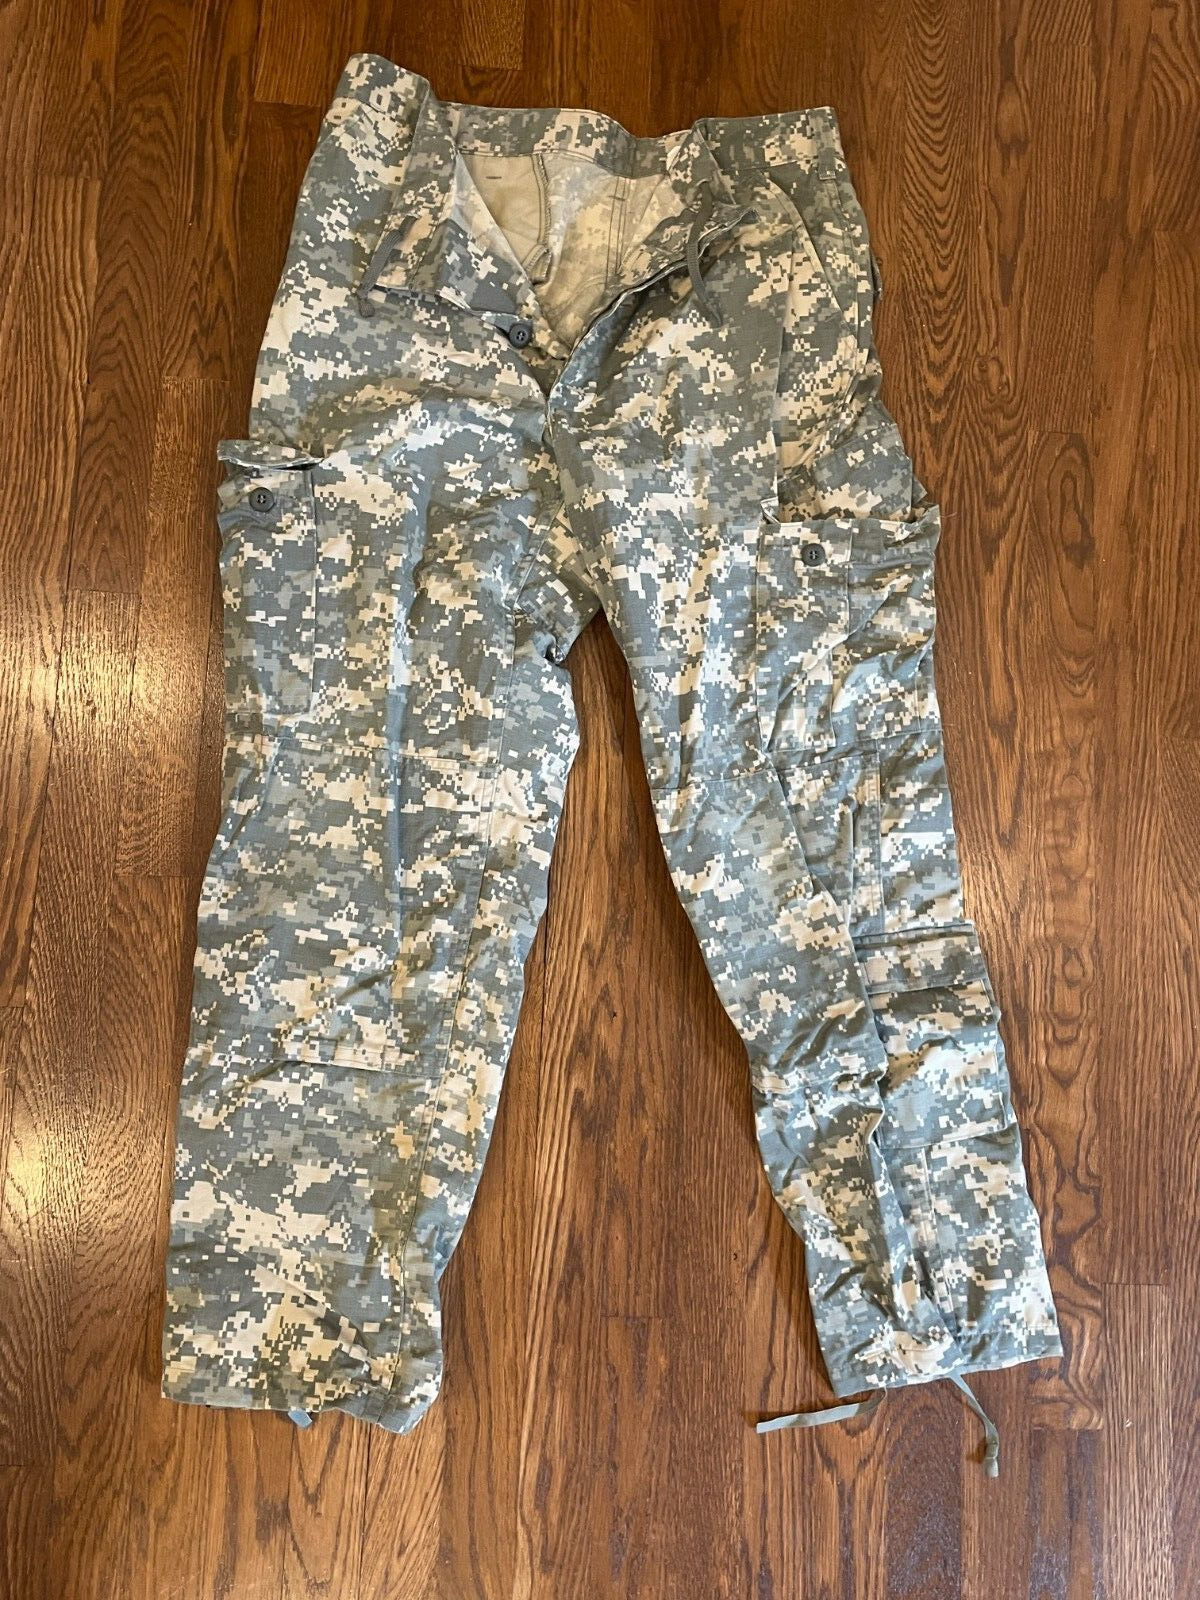 GENUINE MILITARY ISSUE BDU PANTS SIZE LARGE REGULAR